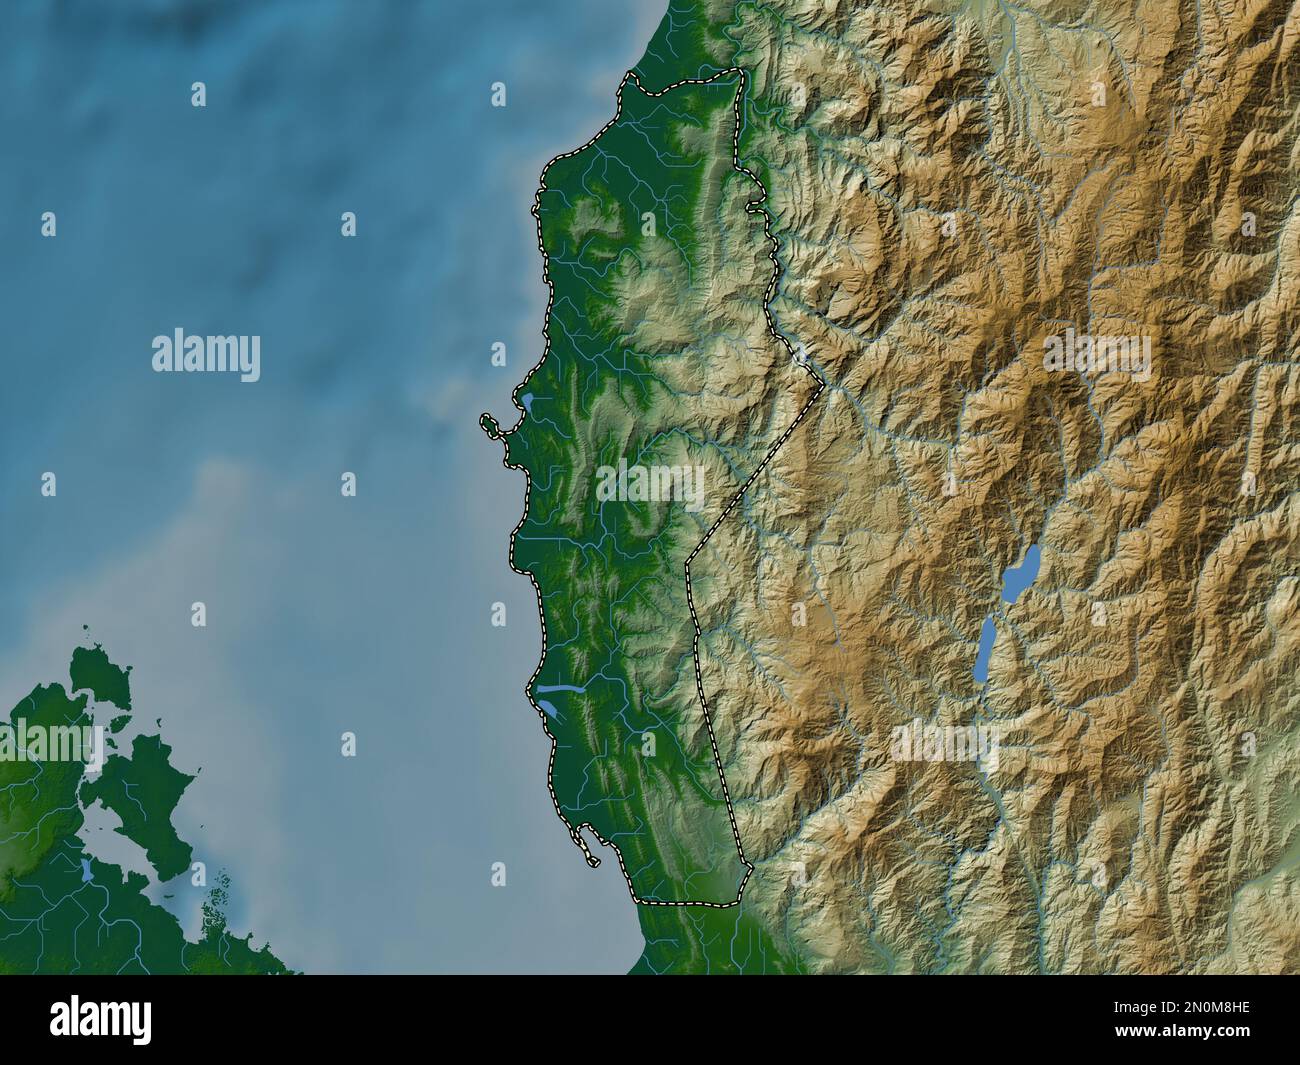 La Union, province of Philippines. Colored elevation map with lakes and rivers Stock Photo